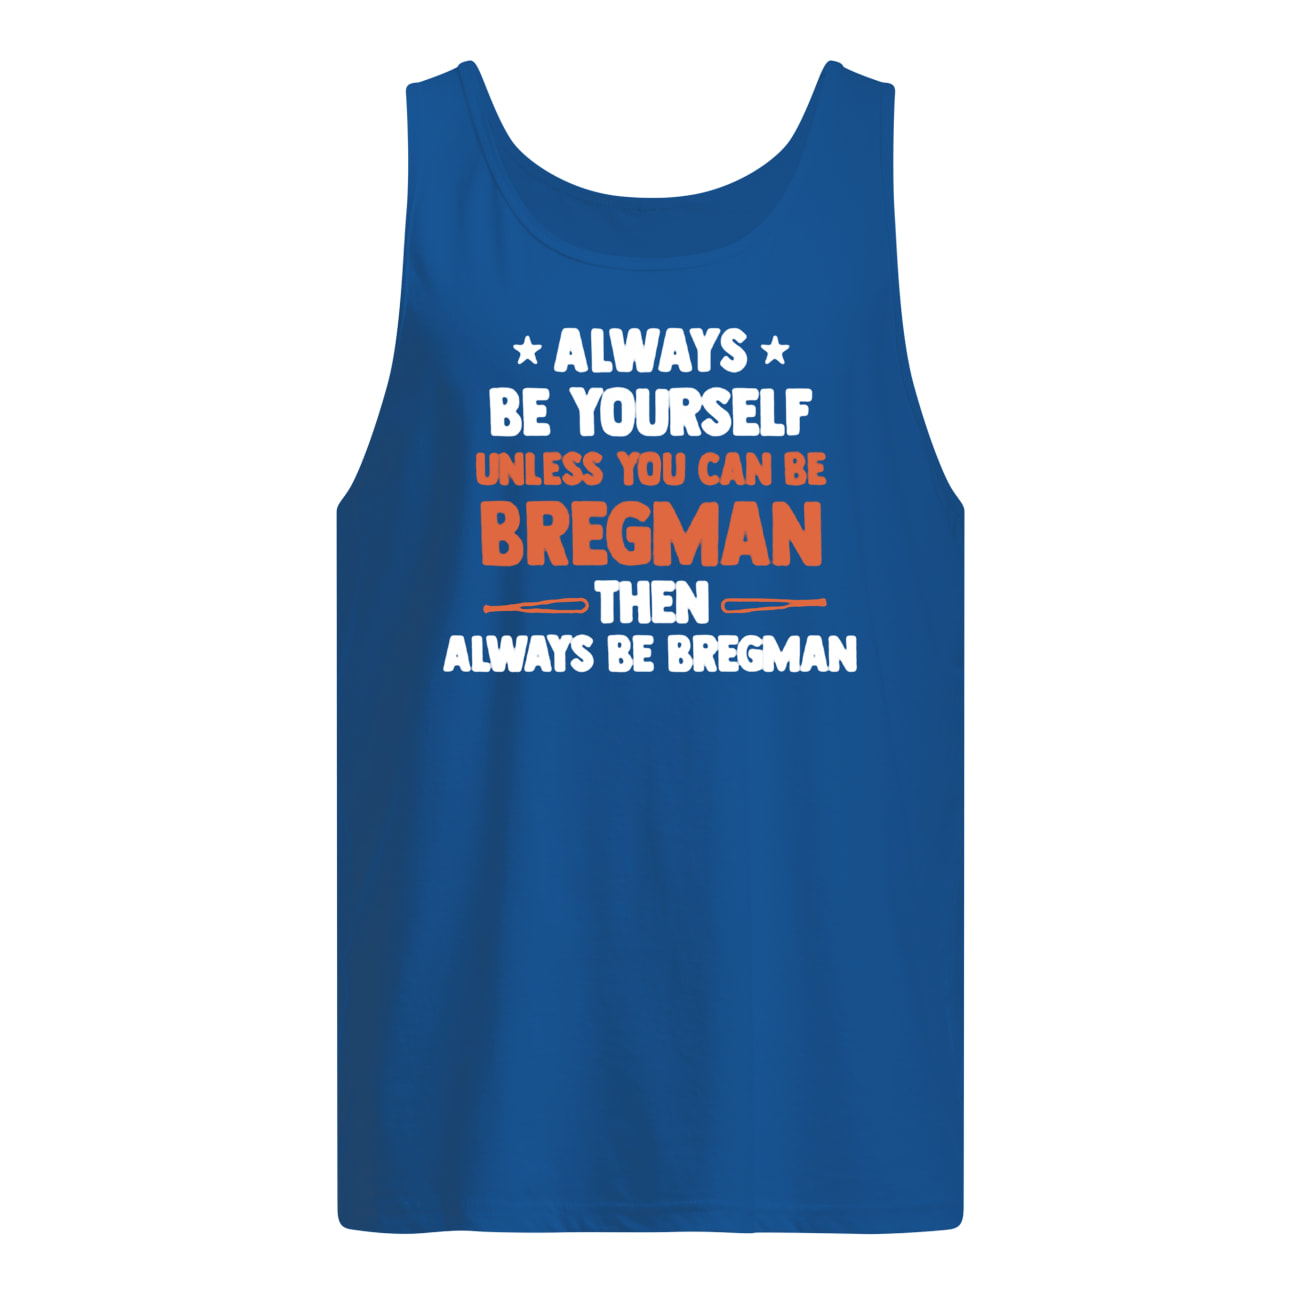 Always be yourself unless you can be bregman then always be bregman tank top